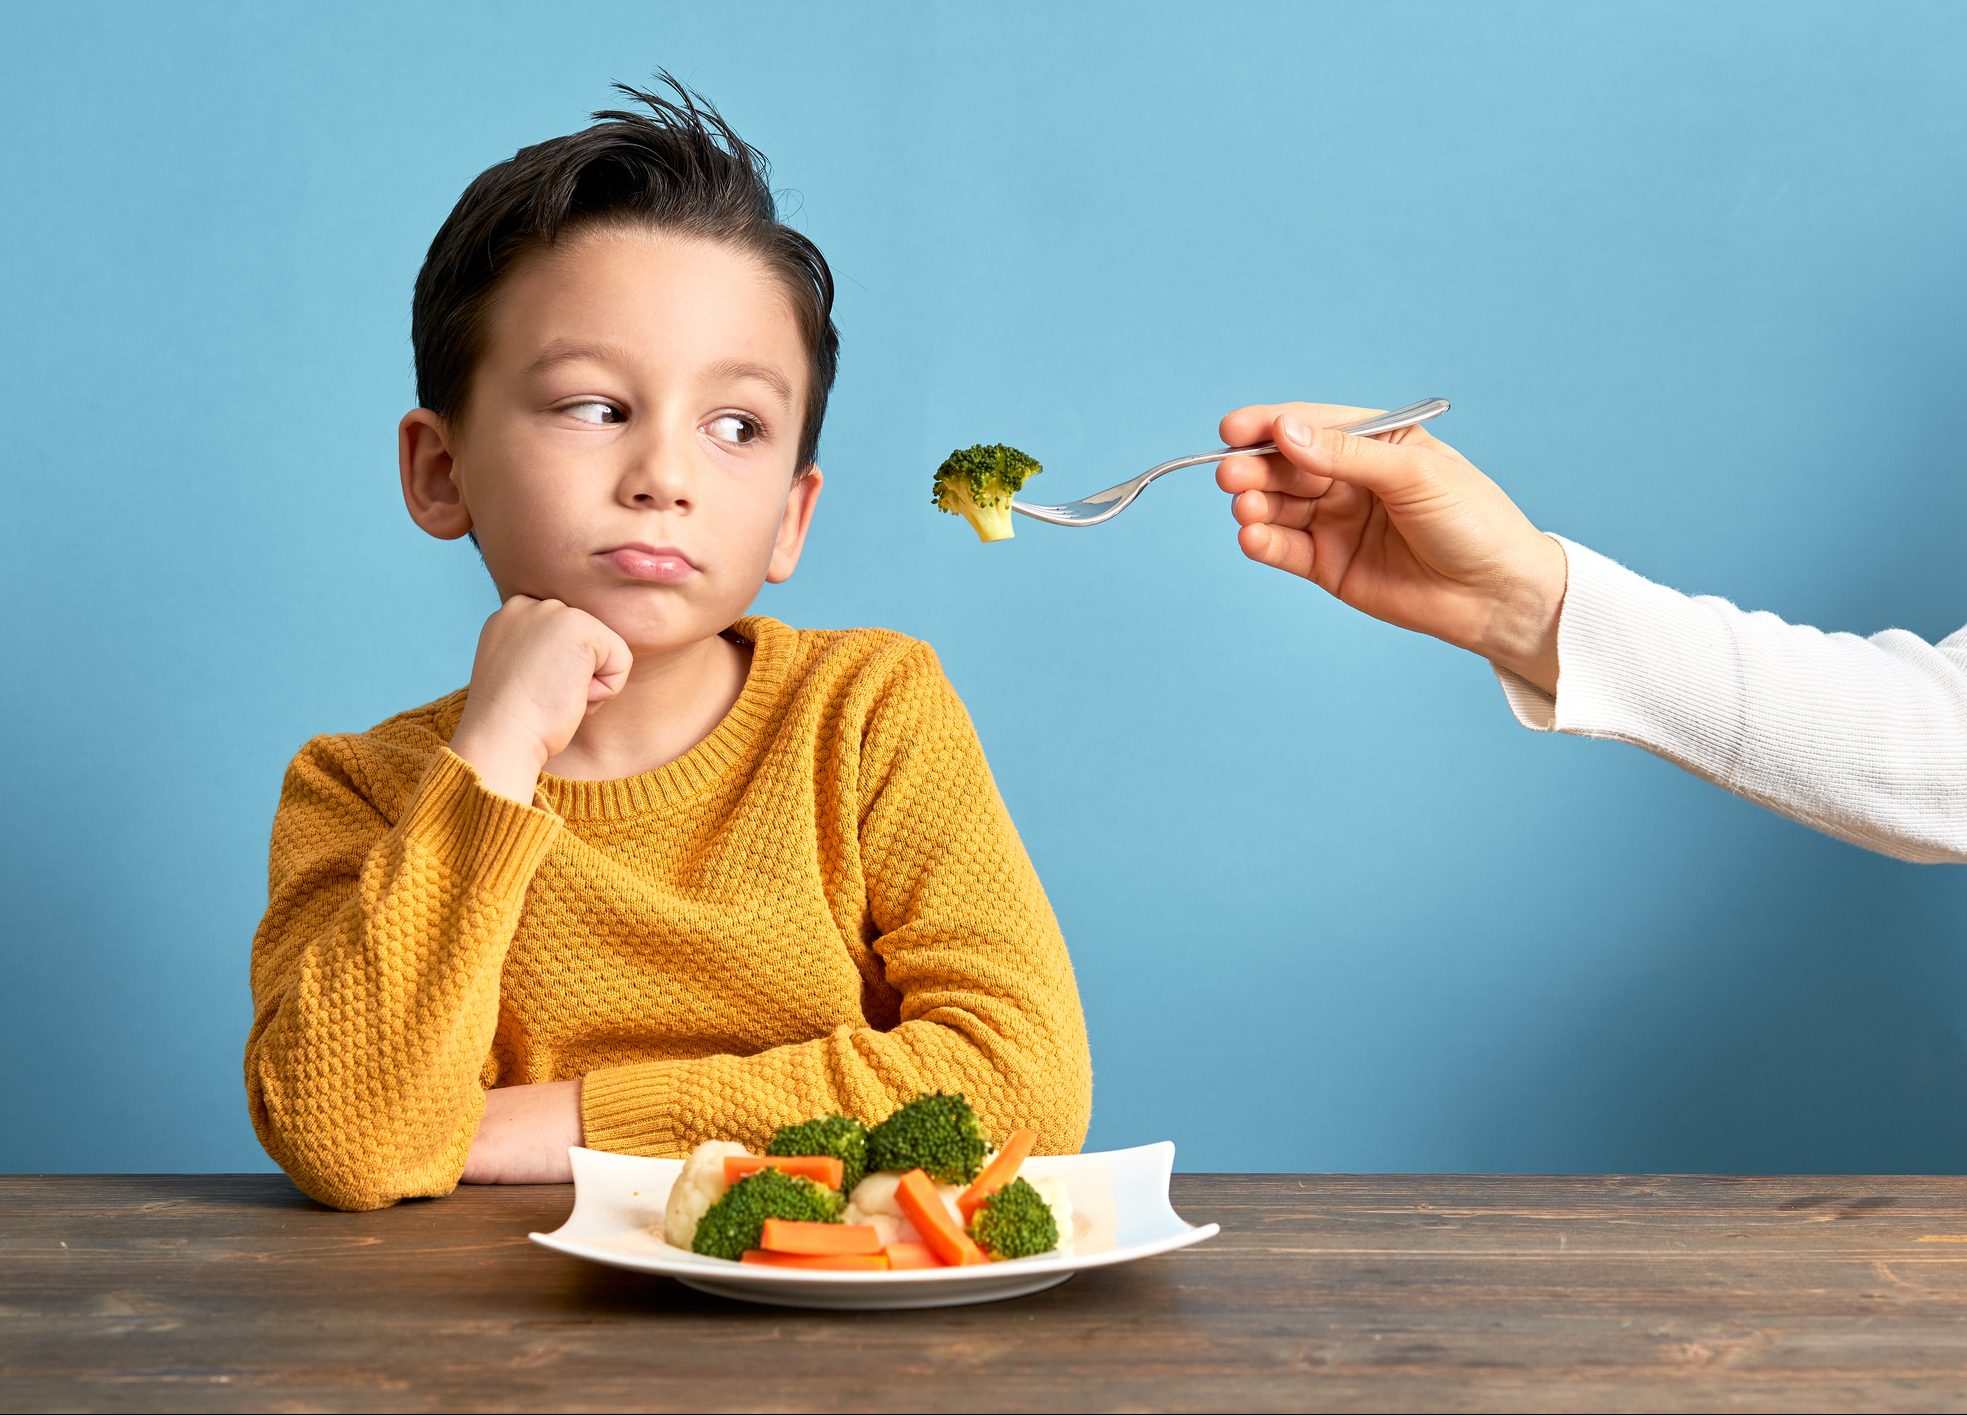 FUNIBER-child-is-very-unhappy-with-having-to-eat-vegetables-